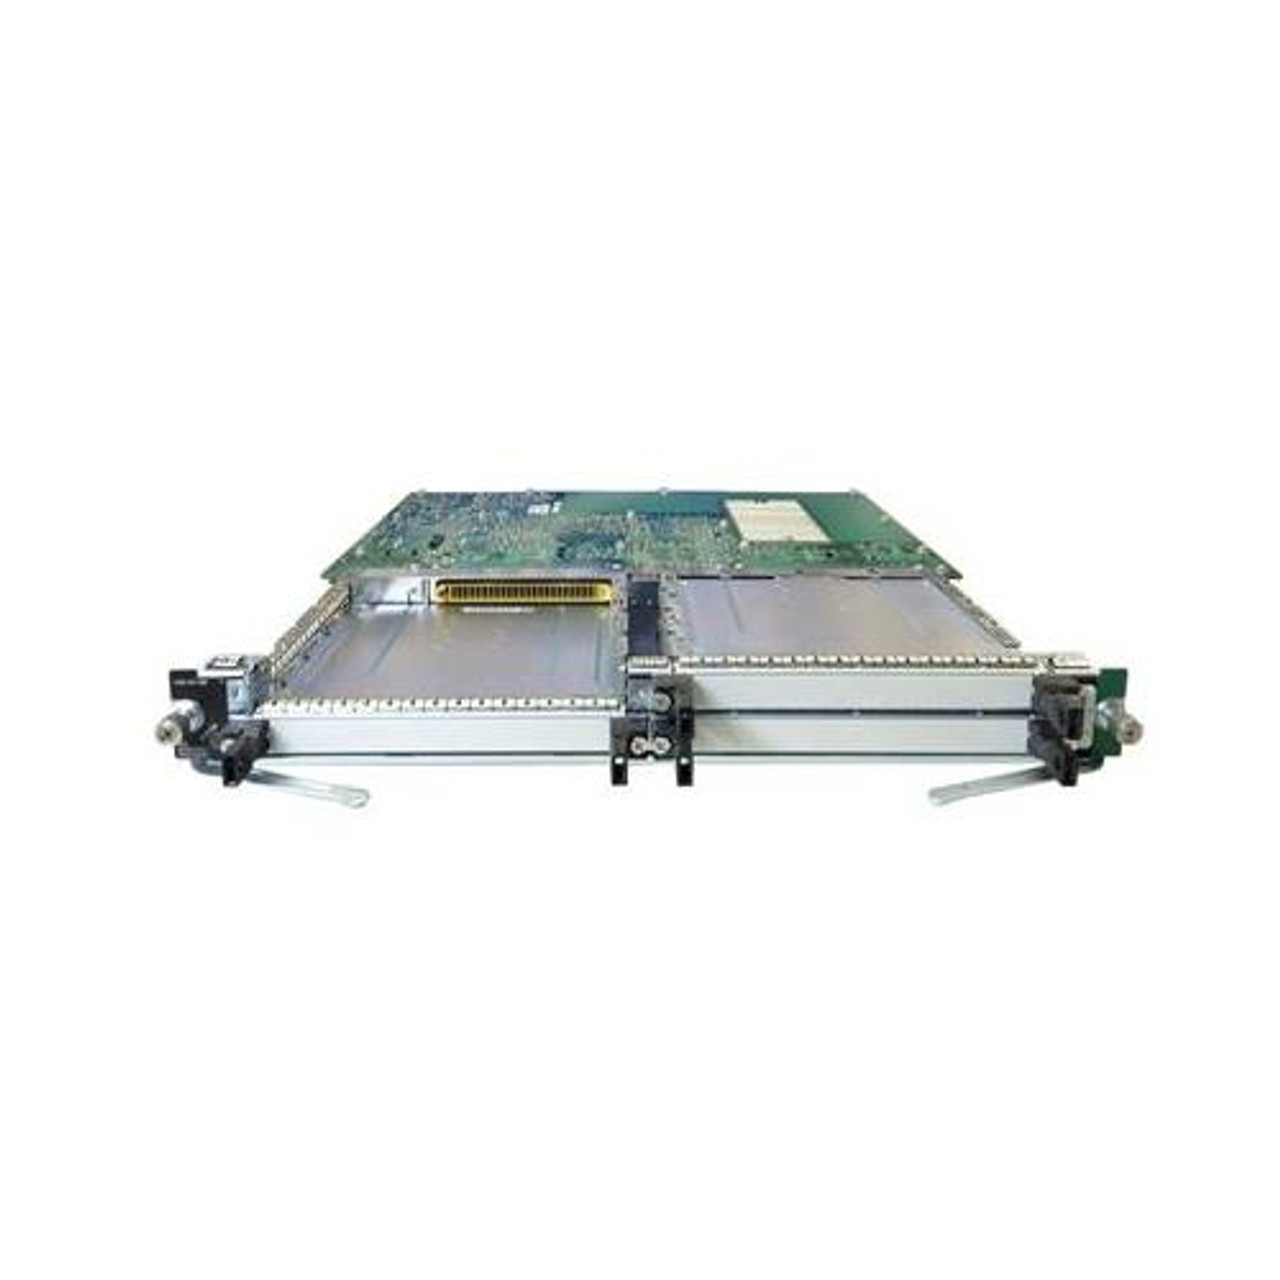 7300-2OC3POS-SMI Cisco Dual-Ports OC-3C/STM-1 Line Card for 7304 Router (Refurbished)